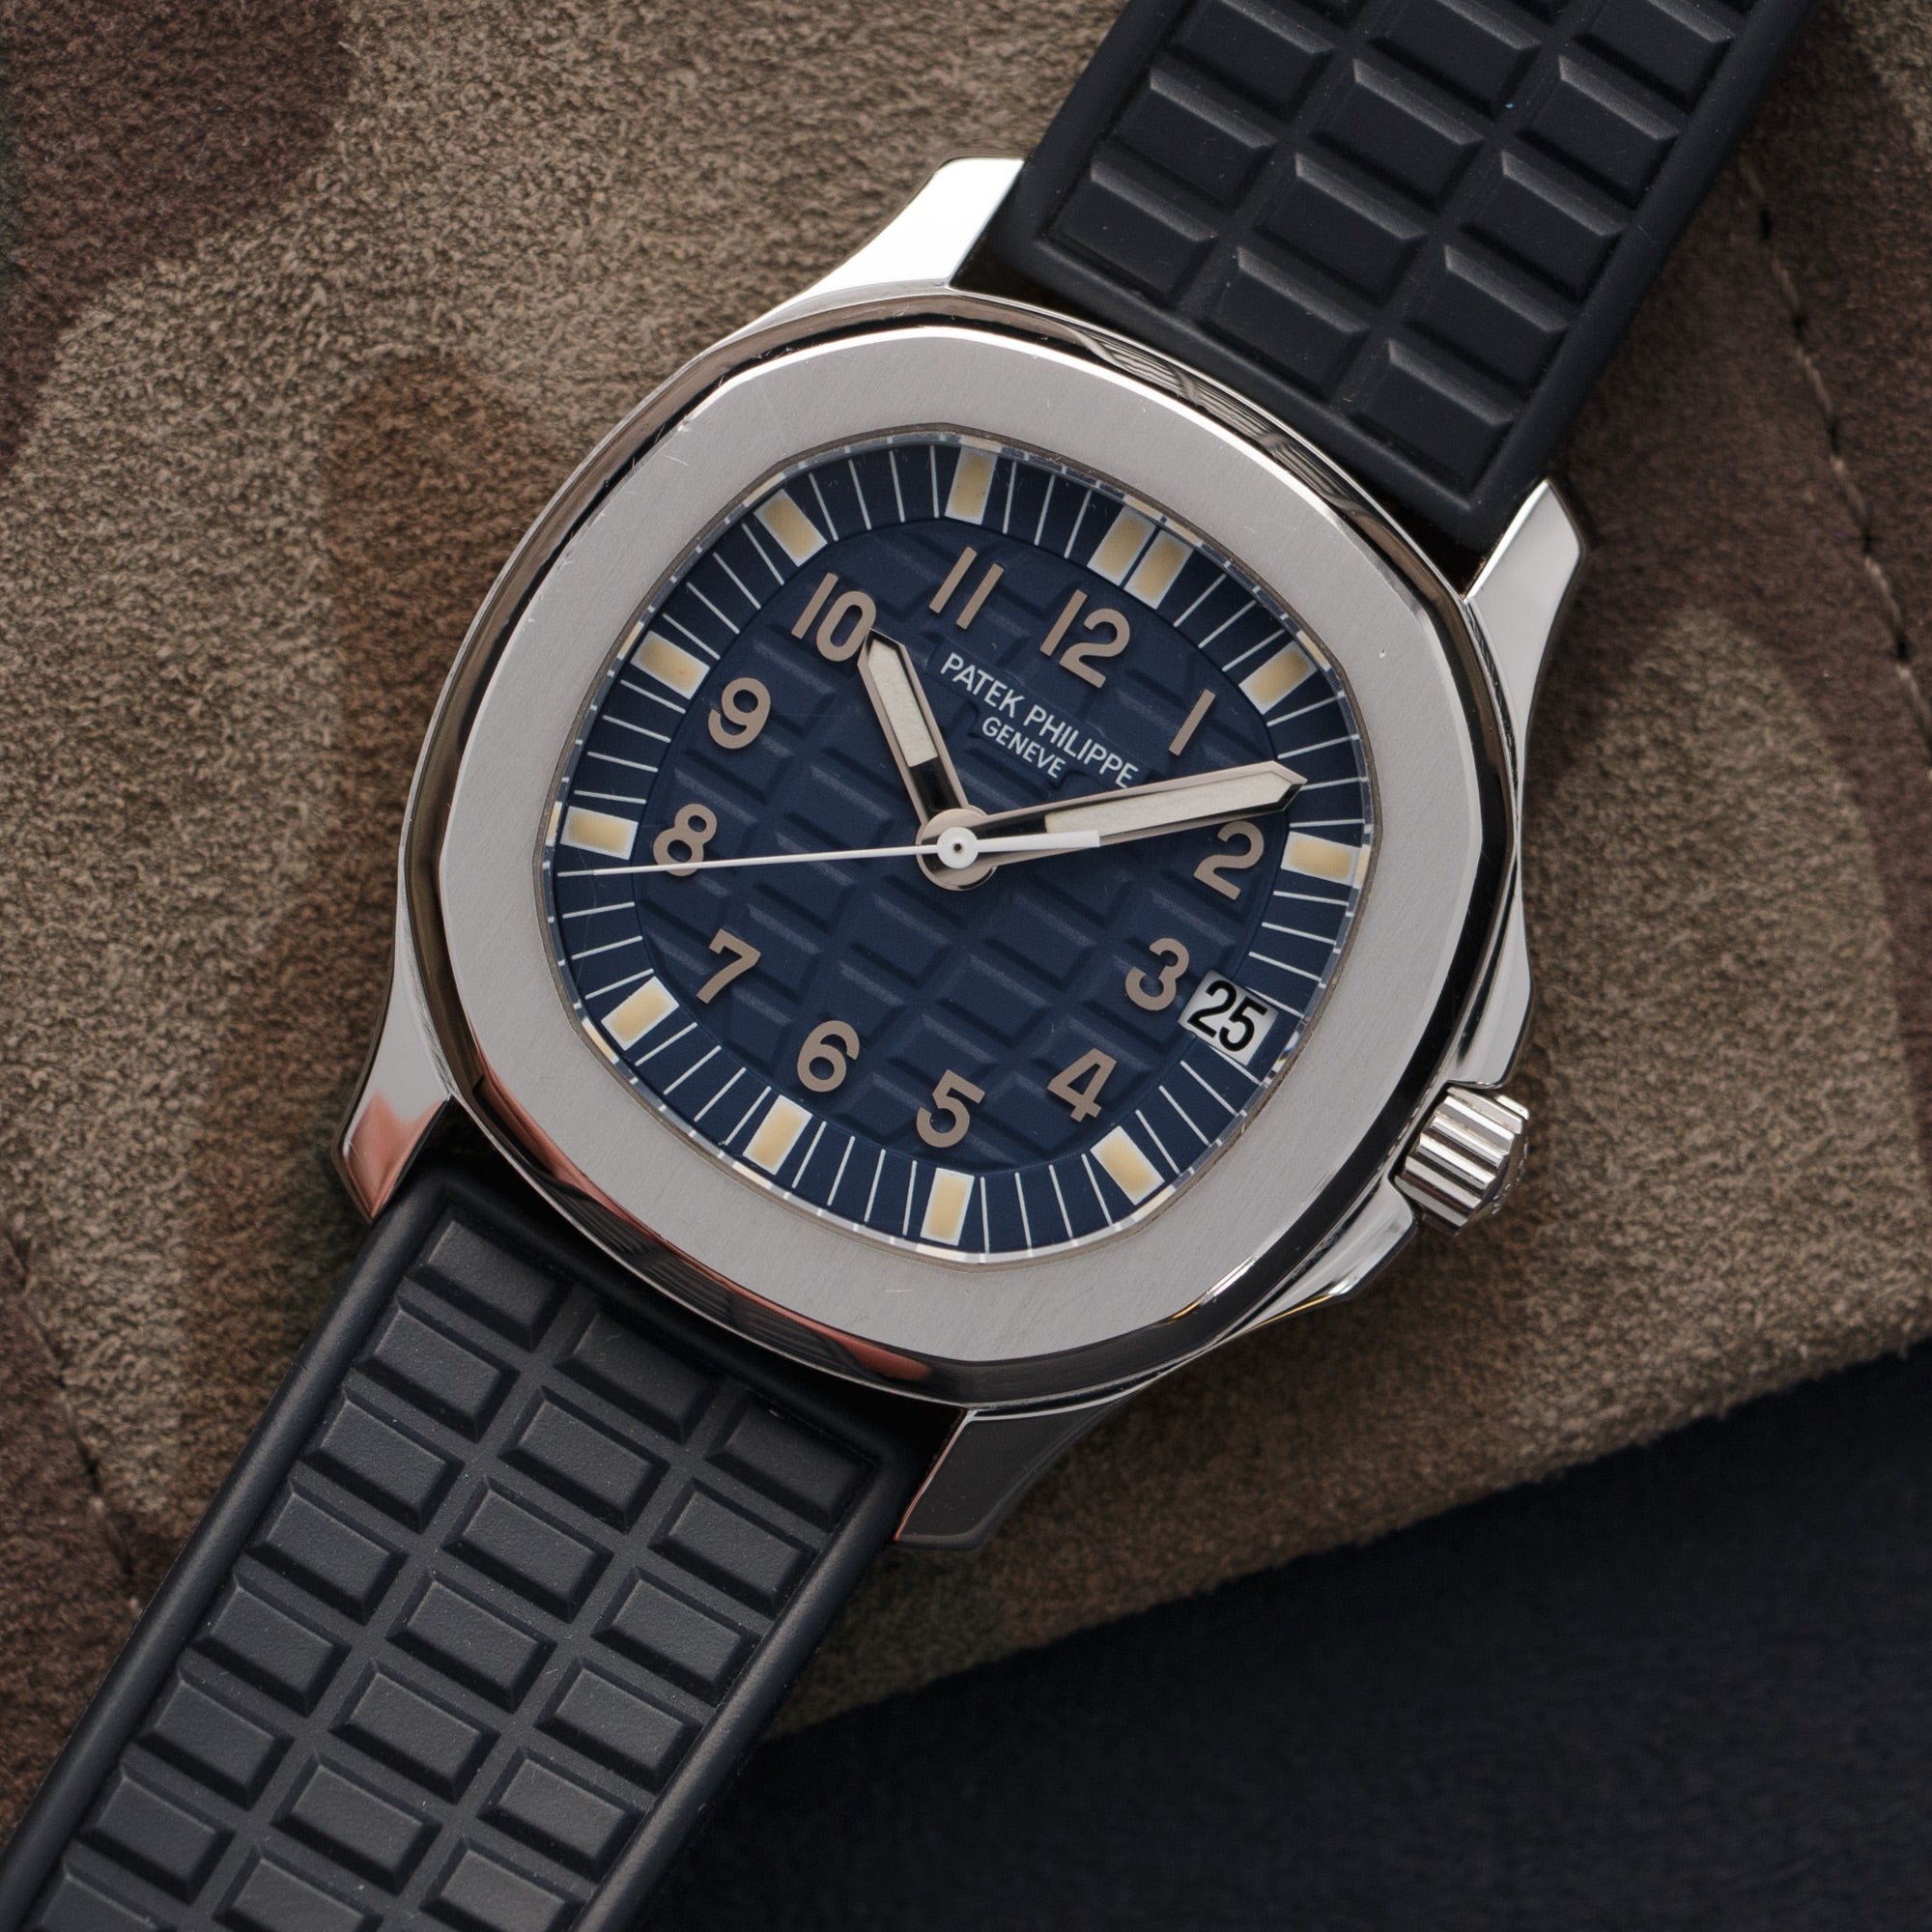 Patek Philippe - Patek Philippe Aquanaut Blue Dial Watch Ref. 5066, Made for the Japanese Market - The Keystone Watches